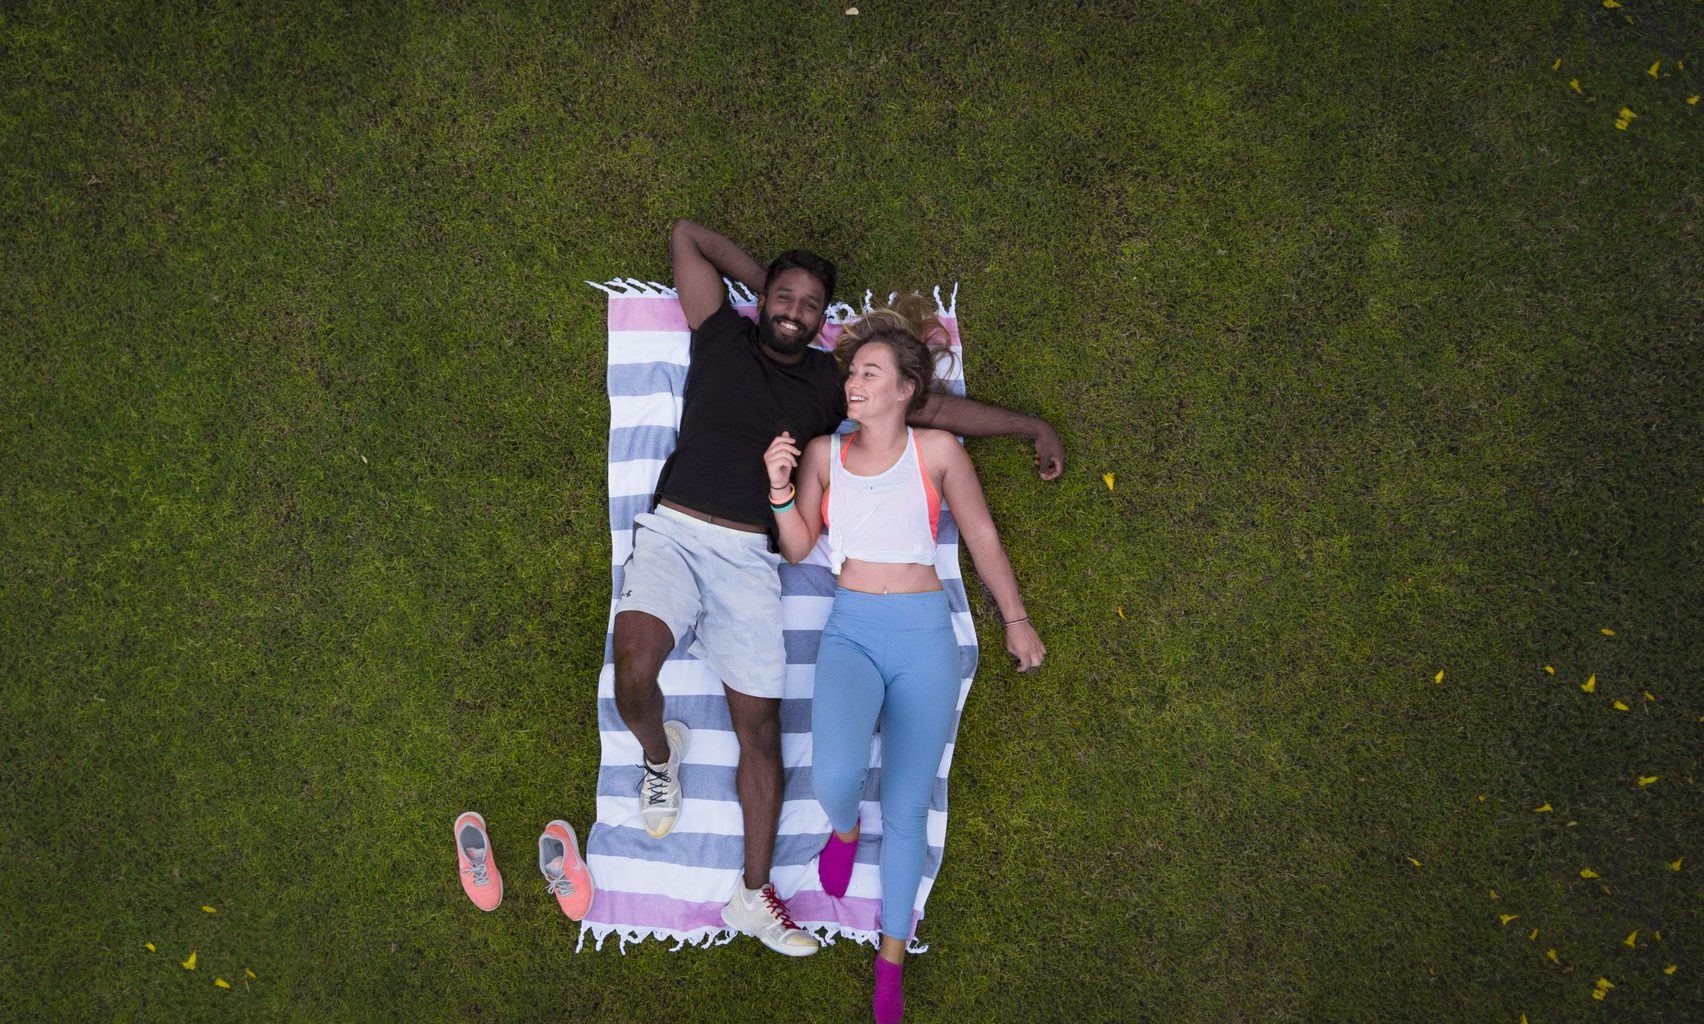 man and woman laying on rug staring upwards
source: thelazyartist from Pexels